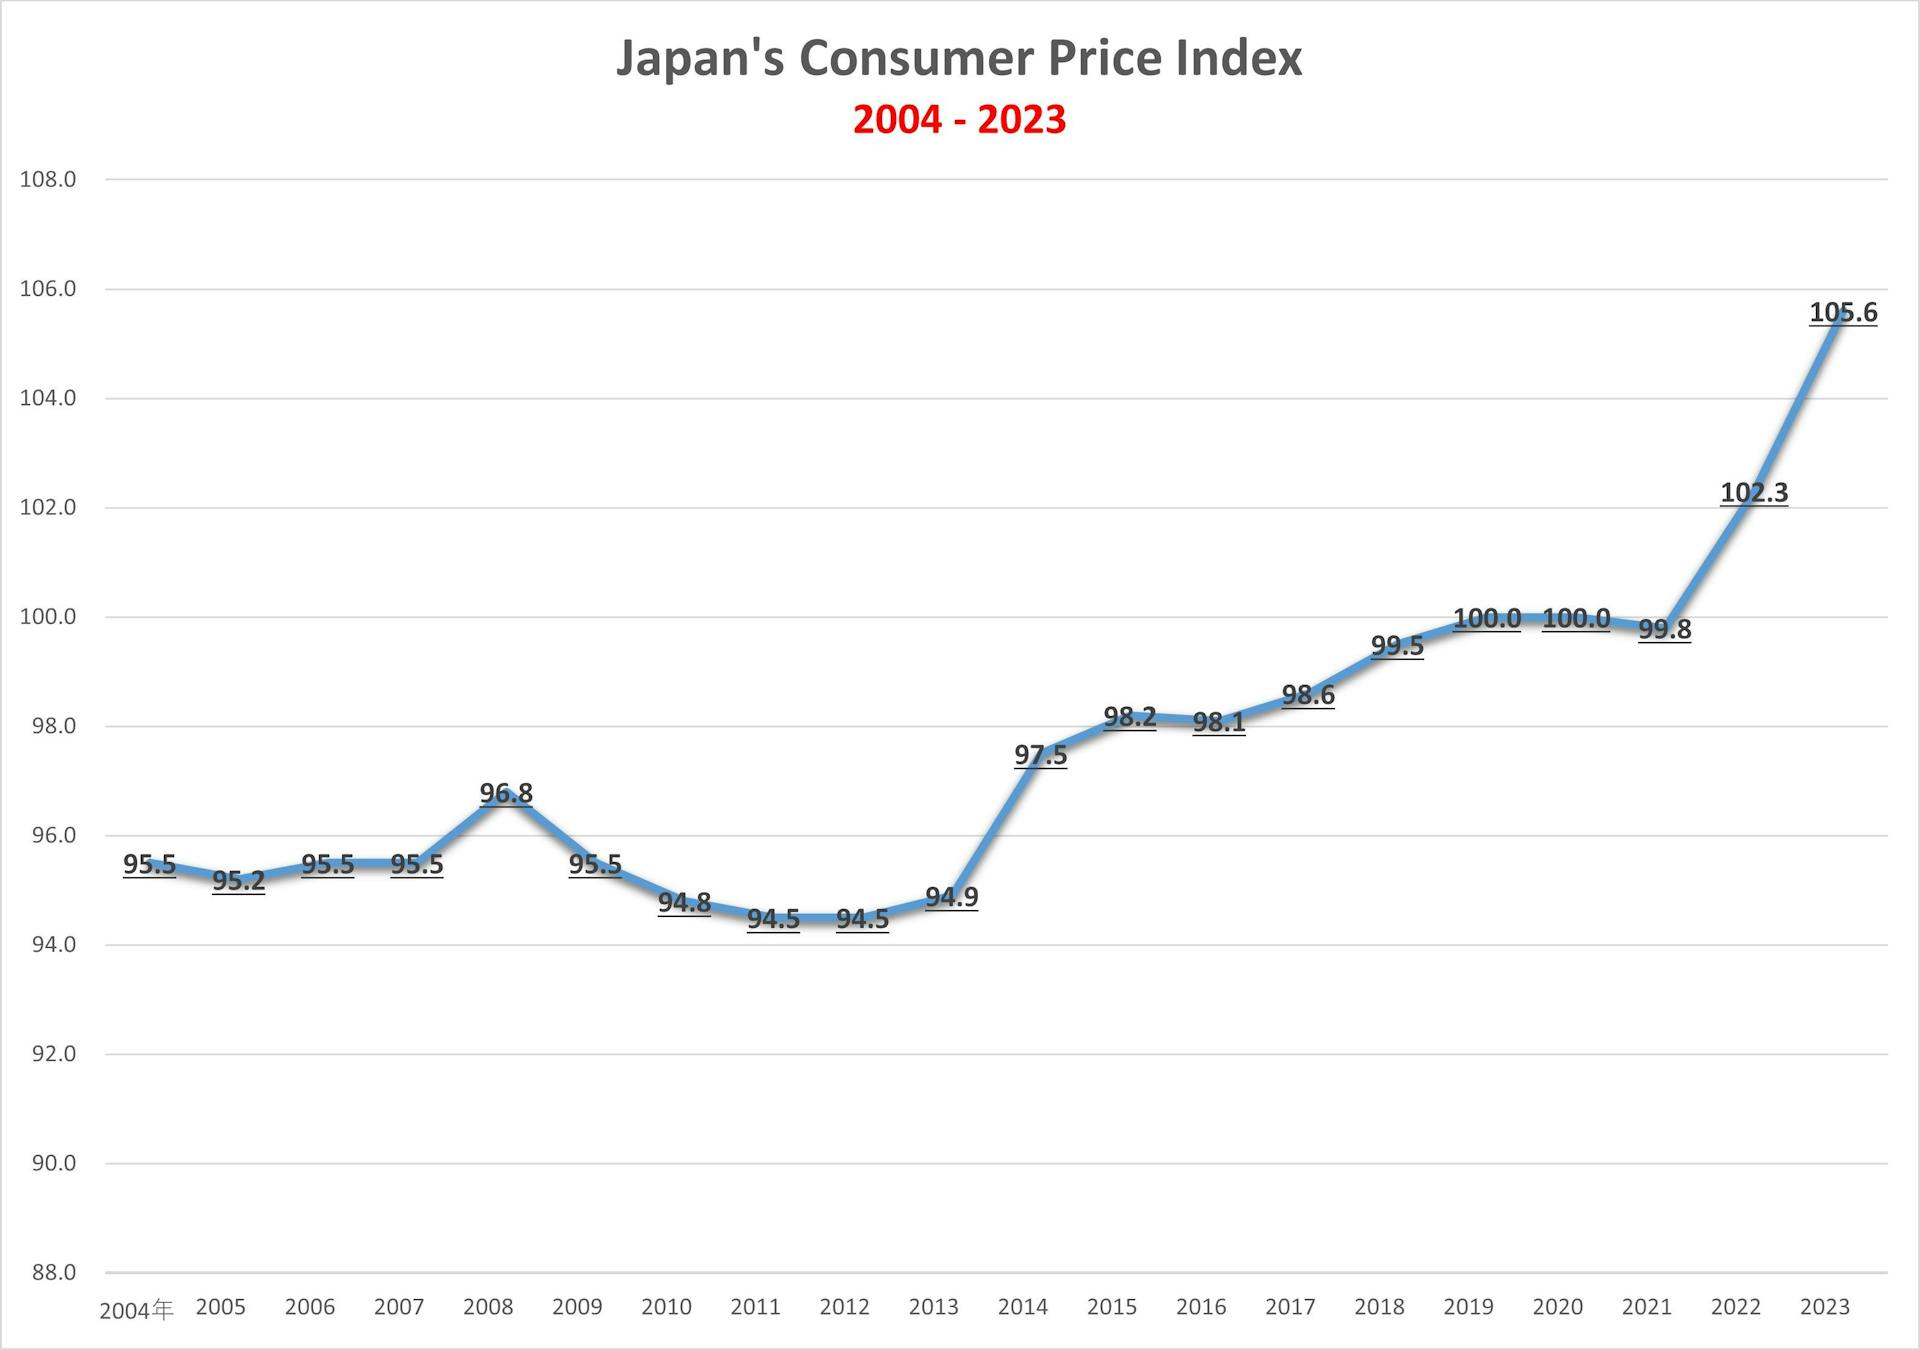 Japan's consumer price index 2004 - 2023. Data sourced from the Statistics Bureau of Japan.